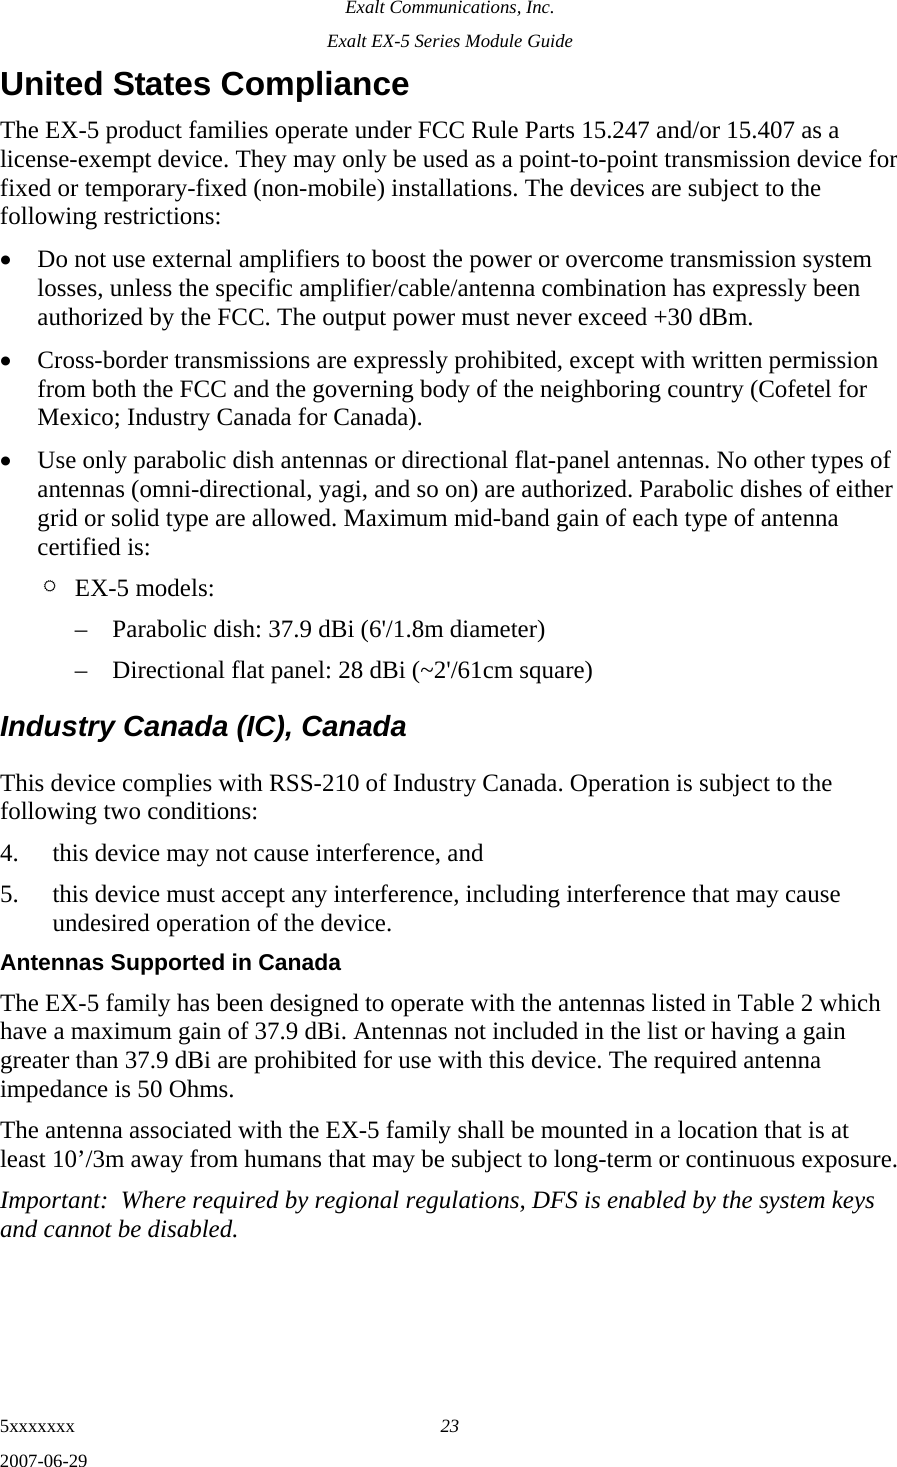 Exalt Communications, Inc. Exalt EX-5 Series Module Guide 5xxxxxxx  23 2007-06-29 United States Compliance The EX-5 product families operate under FCC Rule Parts 15.247 and/or 15.407 as a license-exempt device. They may only be used as a point-to-point transmission device for fixed or temporary-fixed (non-mobile) installations. The devices are subject to the following restrictions: • Do not use external amplifiers to boost the power or overcome transmission system losses, unless the specific amplifier/cable/antenna combination has expressly been authorized by the FCC. The output power must never exceed +30 dBm. • Cross-border transmissions are expressly prohibited, except with written permission from both the FCC and the governing body of the neighboring country (Cofetel for Mexico; Industry Canada for Canada). • Use only parabolic dish antennas or directional flat-panel antennas. No other types of antennas (omni-directional, yagi, and so on) are authorized. Parabolic dishes of either grid or solid type are allowed. Maximum mid-band gain of each type of antenna certified is: ¶ EX-5 models: – Parabolic dish: 37.9 dBi (6&apos;/1.8m diameter) – Directional flat panel: 28 dBi (~2&apos;/61cm square) Industry Canada (IC), Canada This device complies with RSS-210 of Industry Canada. Operation is subject to the following two conditions: 4. this device may not cause interference, and 5. this device must accept any interference, including interference that may cause undesired operation of the device. Antennas Supported in Canada The EX-5 family has been designed to operate with the antennas listed in Table 2 which have a maximum gain of 37.9 dBi. Antennas not included in the list or having a gain greater than 37.9 dBi are prohibited for use with this device. The required antenna impedance is 50 Ohms. The antenna associated with the EX-5 family shall be mounted in a location that is at least 10’/3m away from humans that may be subject to long-term or continuous exposure. Important:  Where required by regional regulations, DFS is enabled by the system keys and cannot be disabled. 